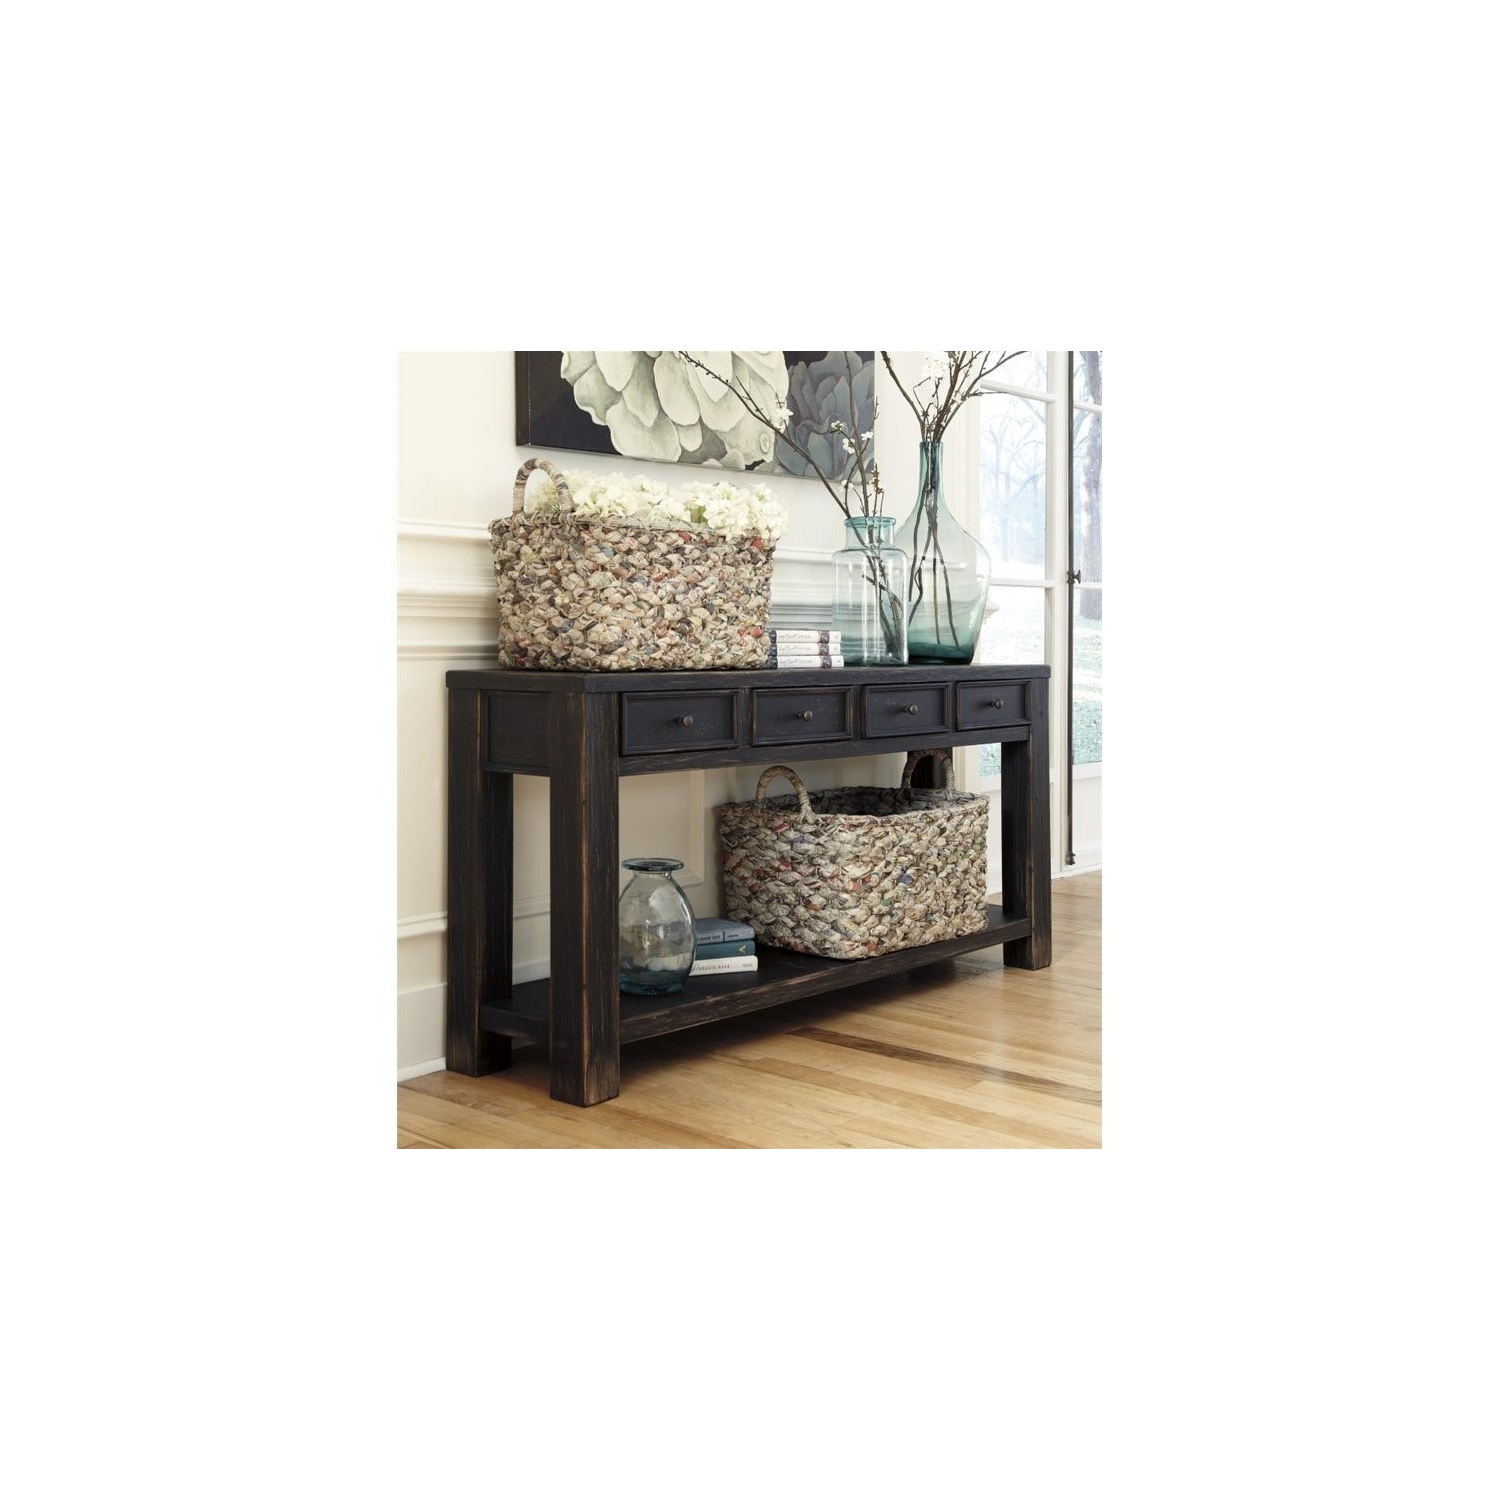 Ashley Furniture Gavelston Console Table in Black